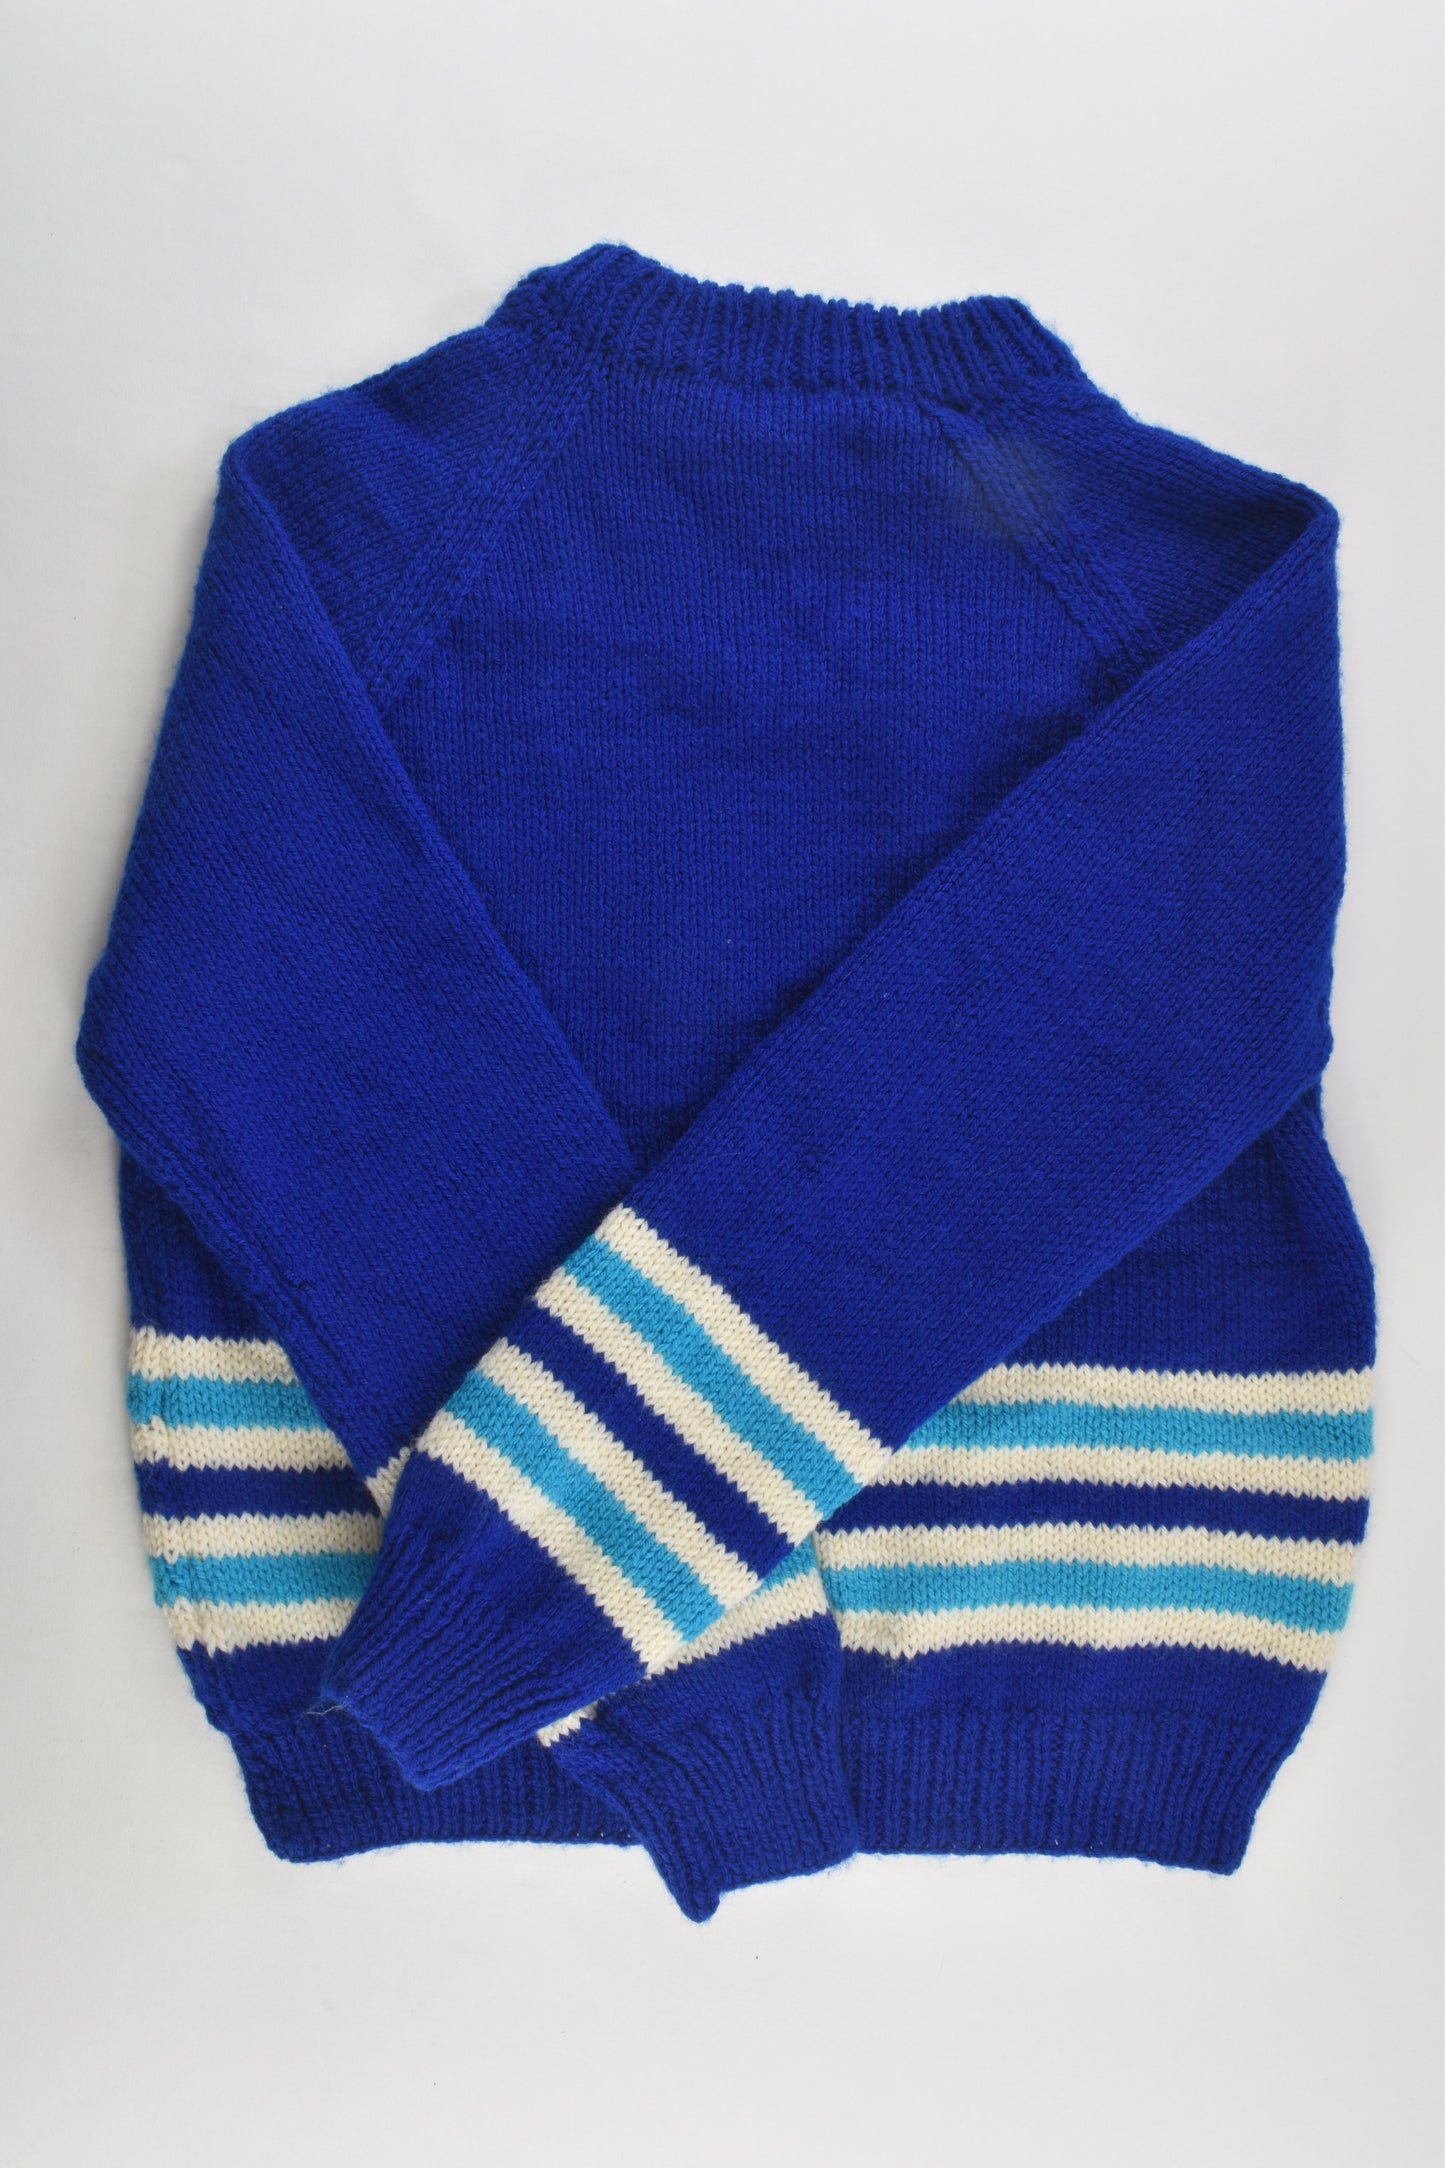 Handmade Size approx 7-8 Blue Knitted Jumper